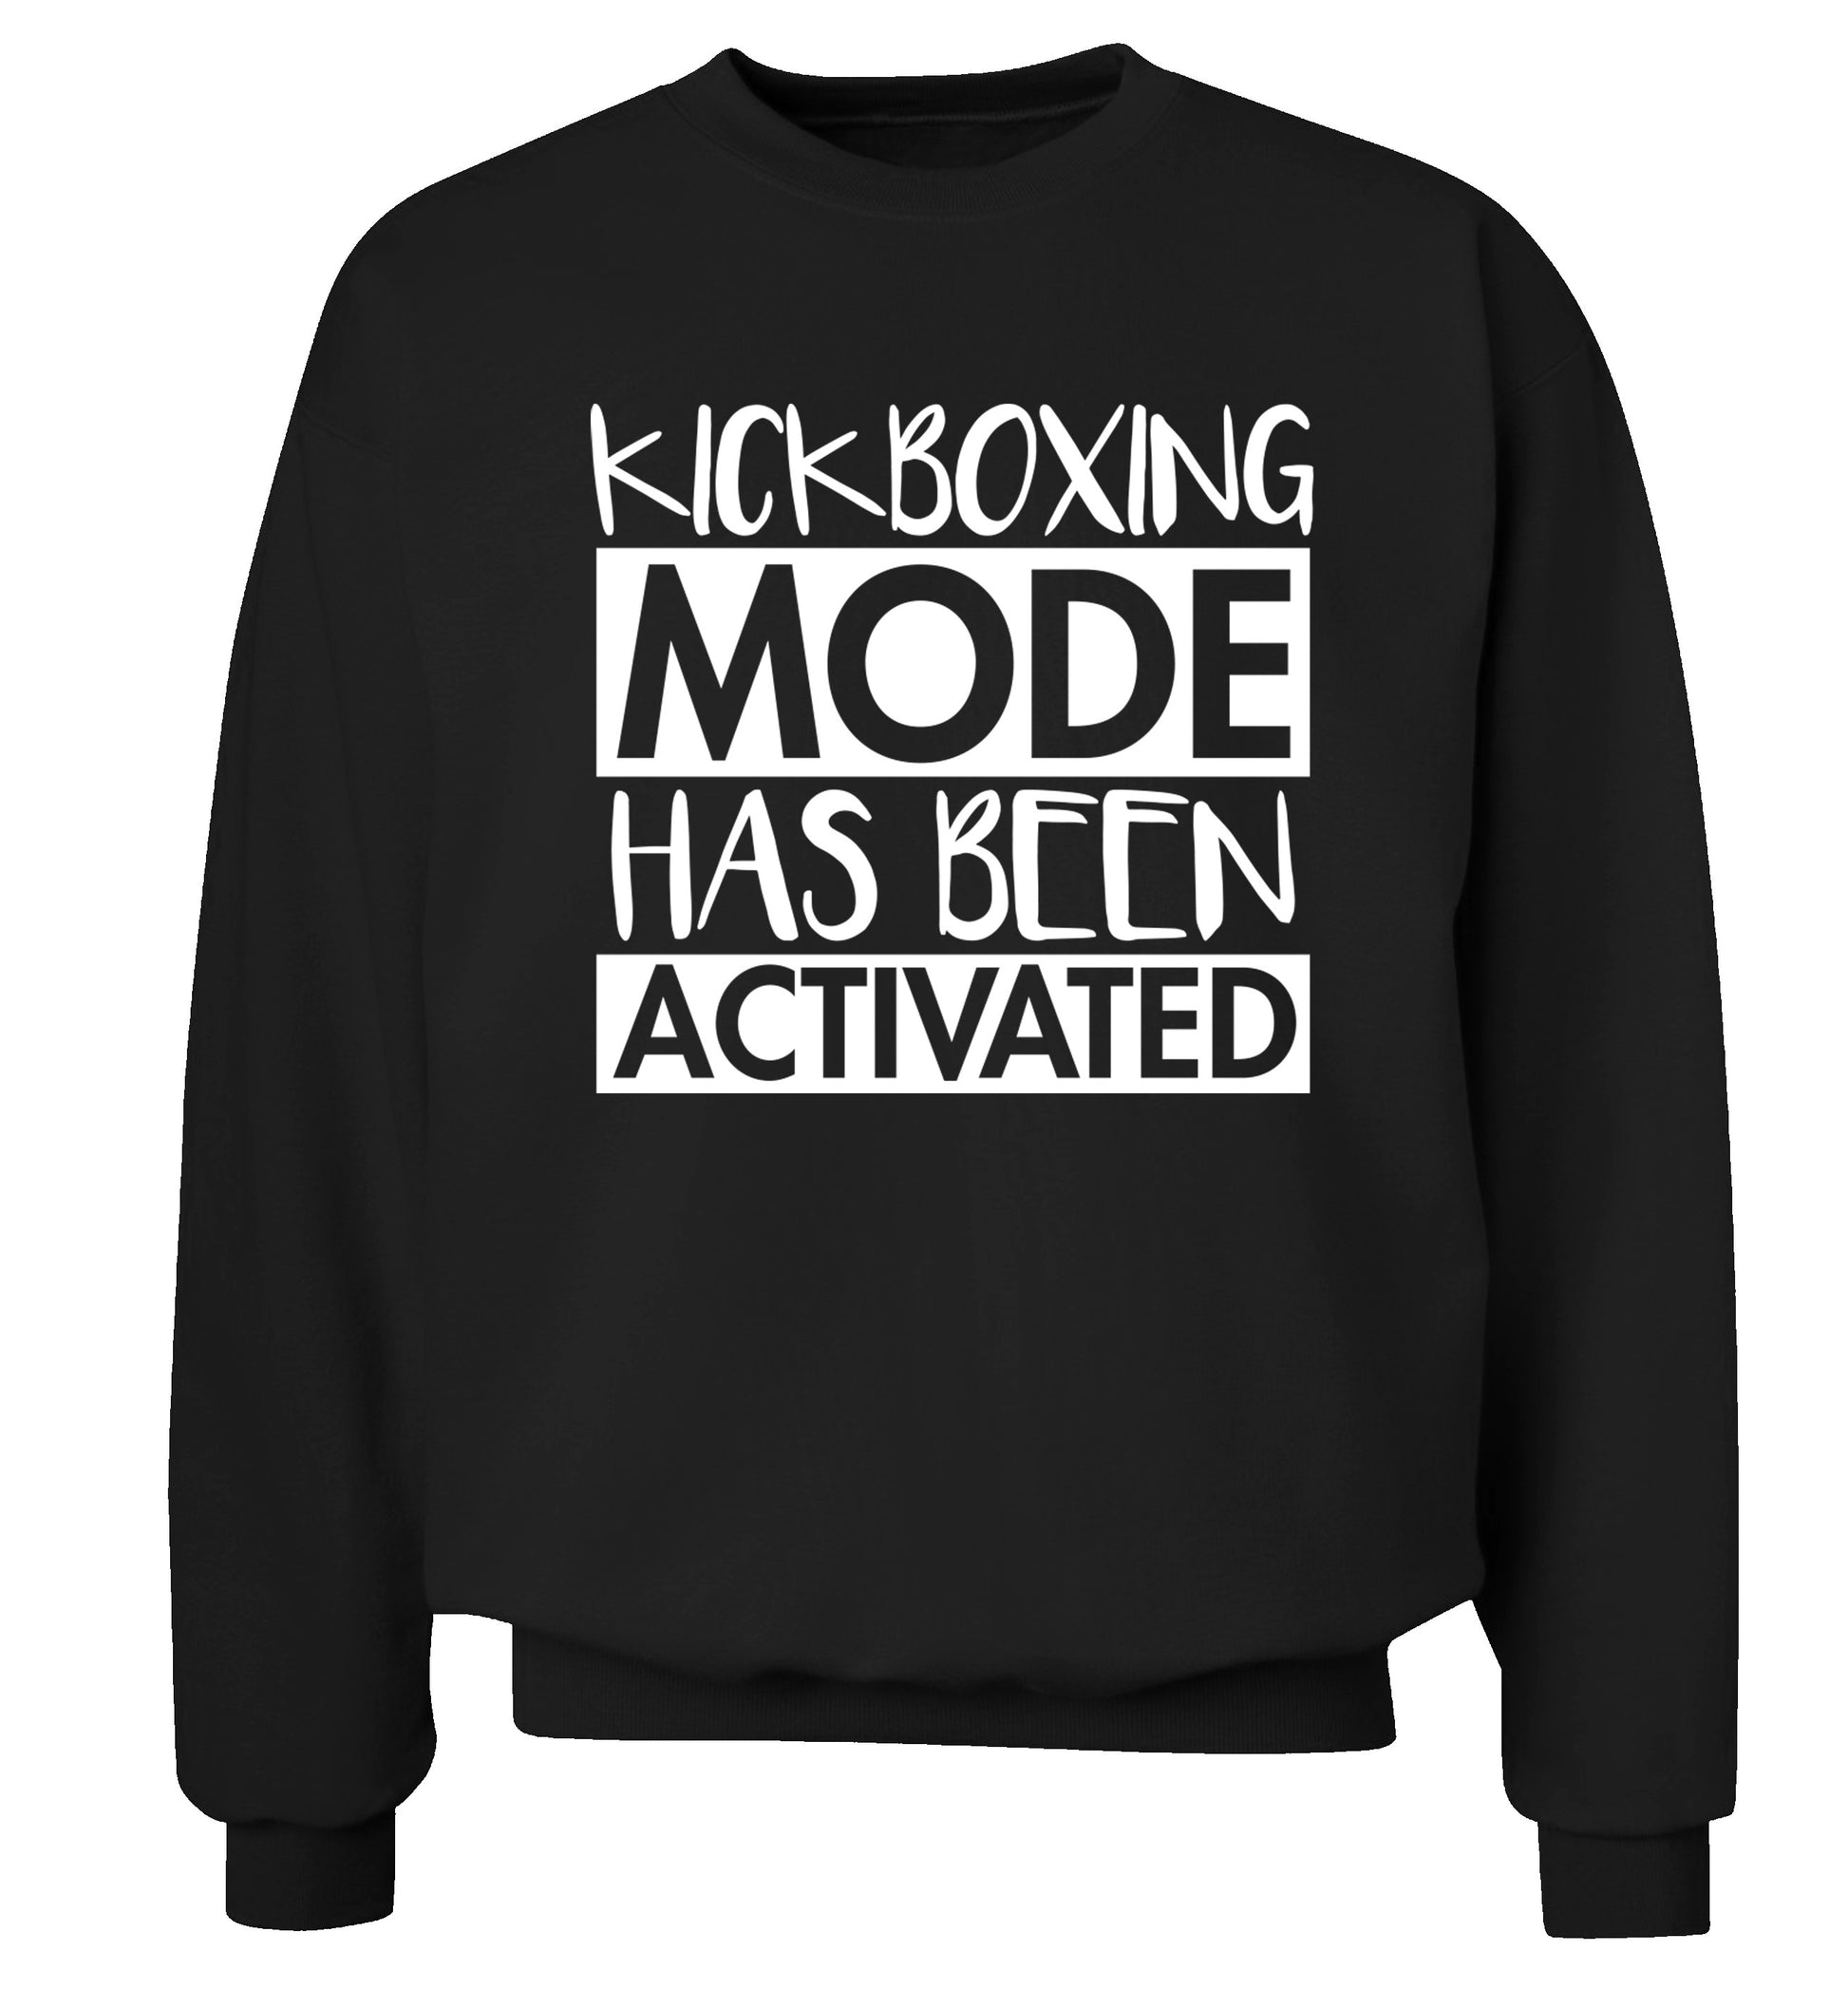 Kickboxing mode activated Adult's unisex black Sweater 2XL